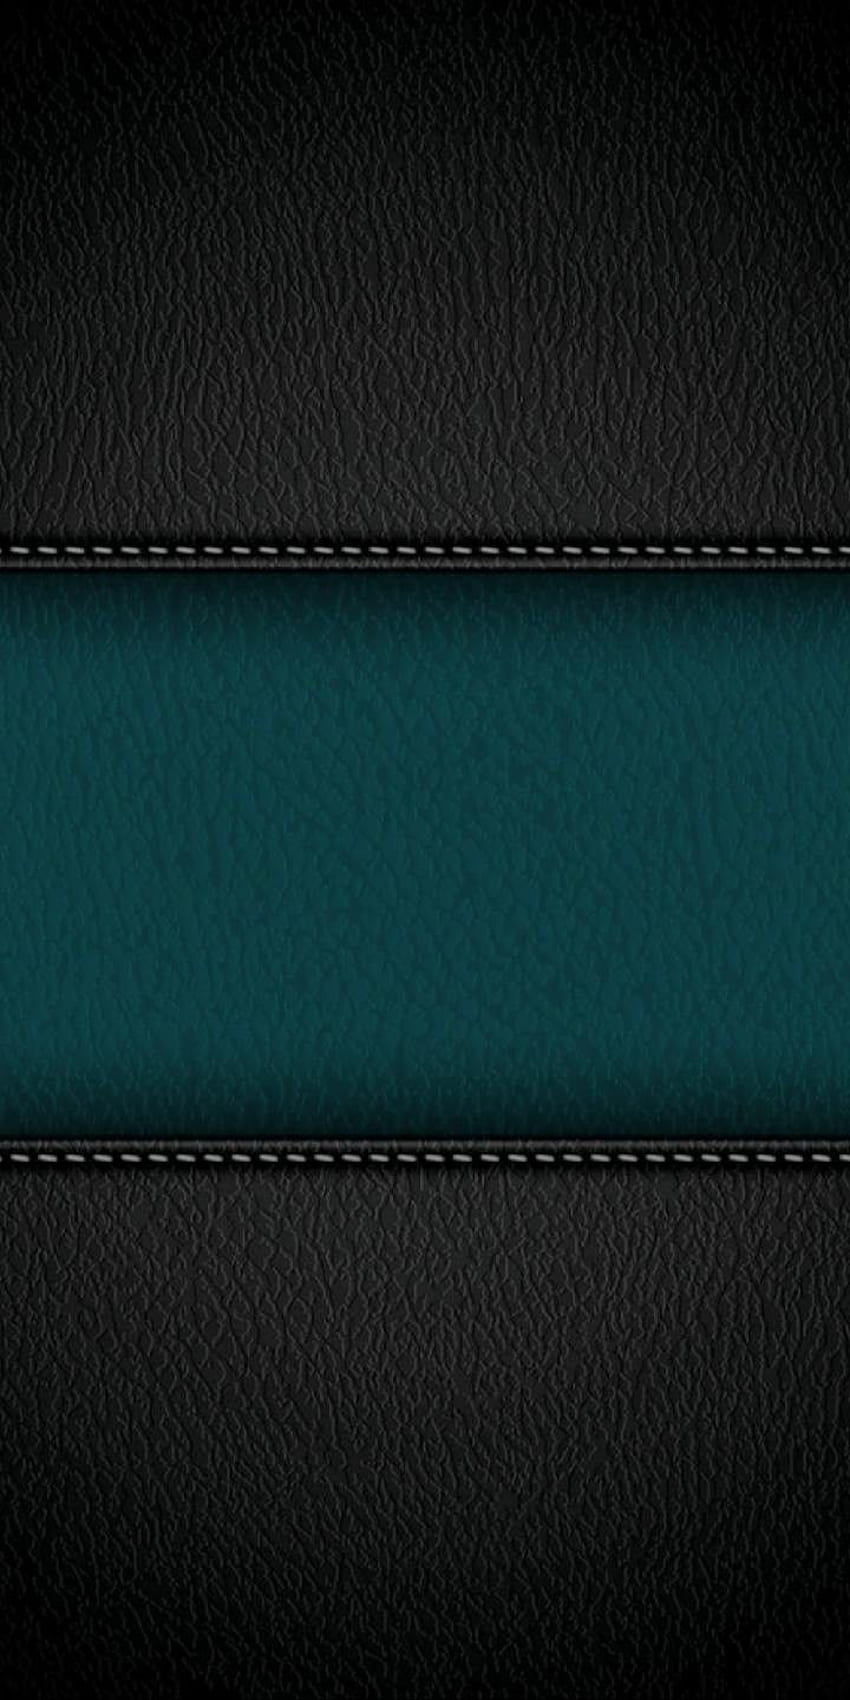 Leather Green & Gray in 2021. Galaxy phone , Red paper texture, Phone screen, 그레이 가죽 HD 전화 배경 화면